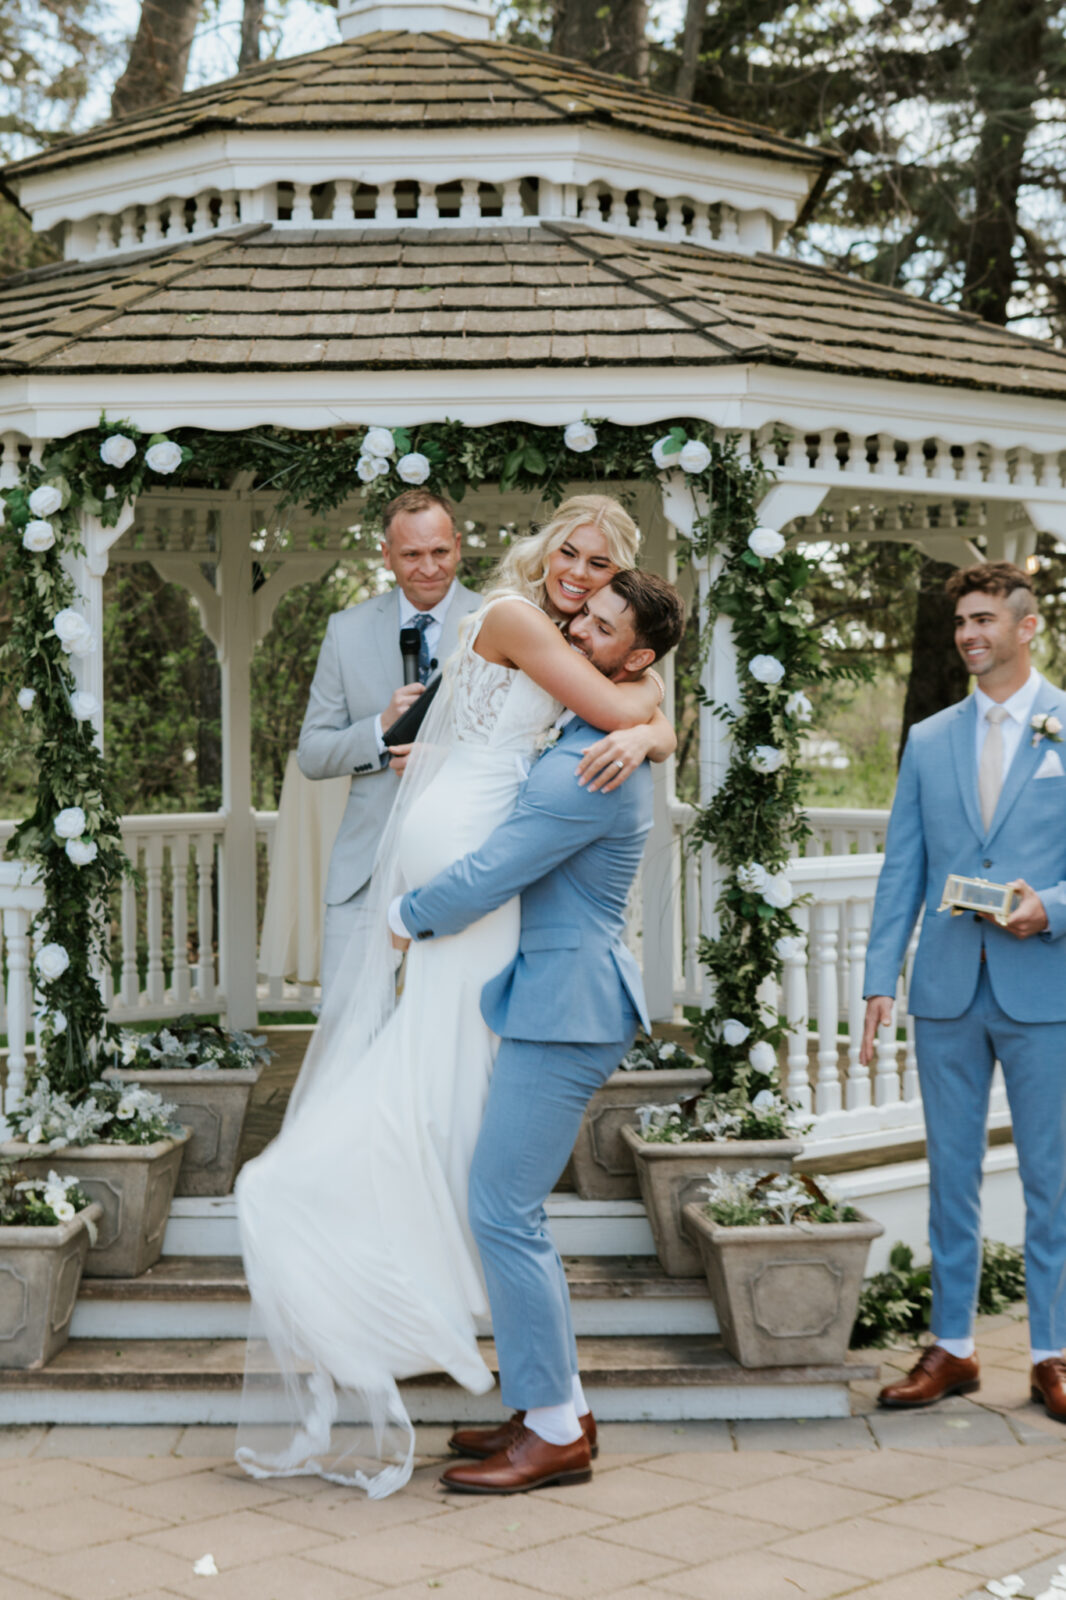 baby blue wedding, vintage meets classic wedding inspiration, summer wedding inspiration
